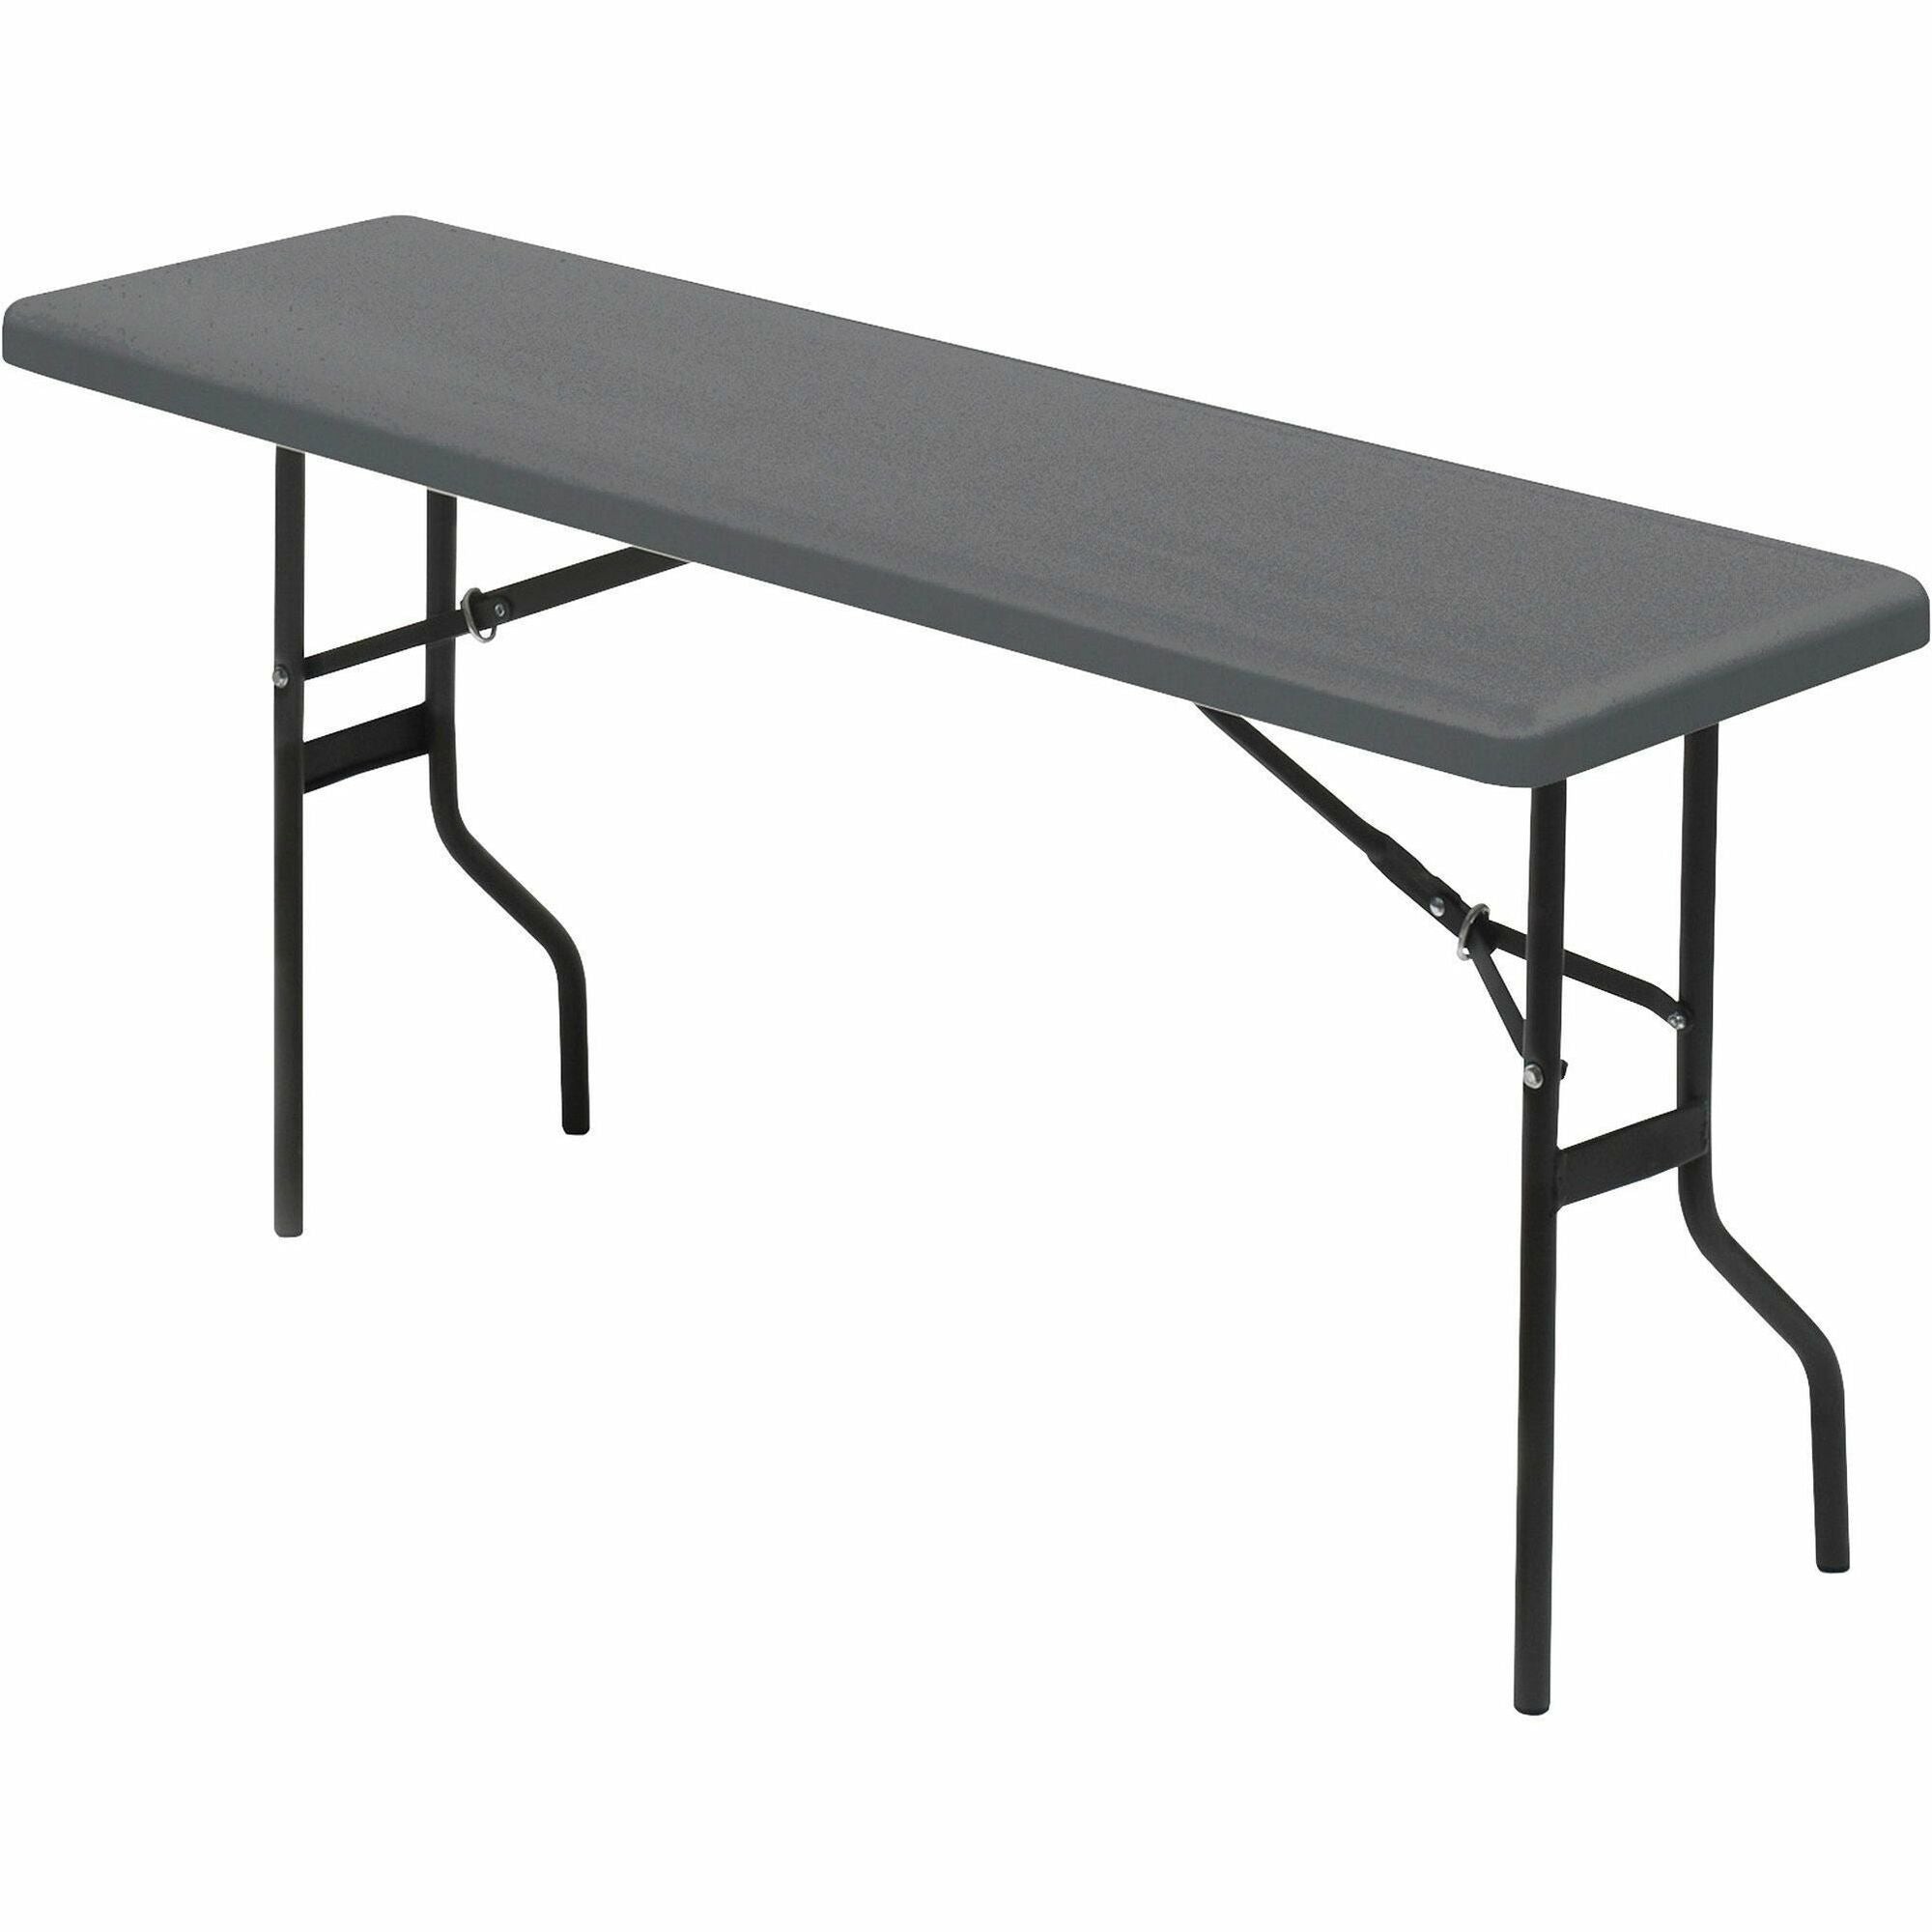 Iceberg IndestrucTable TOO 1200 Series Foldlng Table - For - Table TopRectangle Top - Contemporary Style - 250 lb Capacity - 72" Table Top Length x 18" Table Top Width - 29" Height - Charcoal, Powder Coated - 1 Each - 